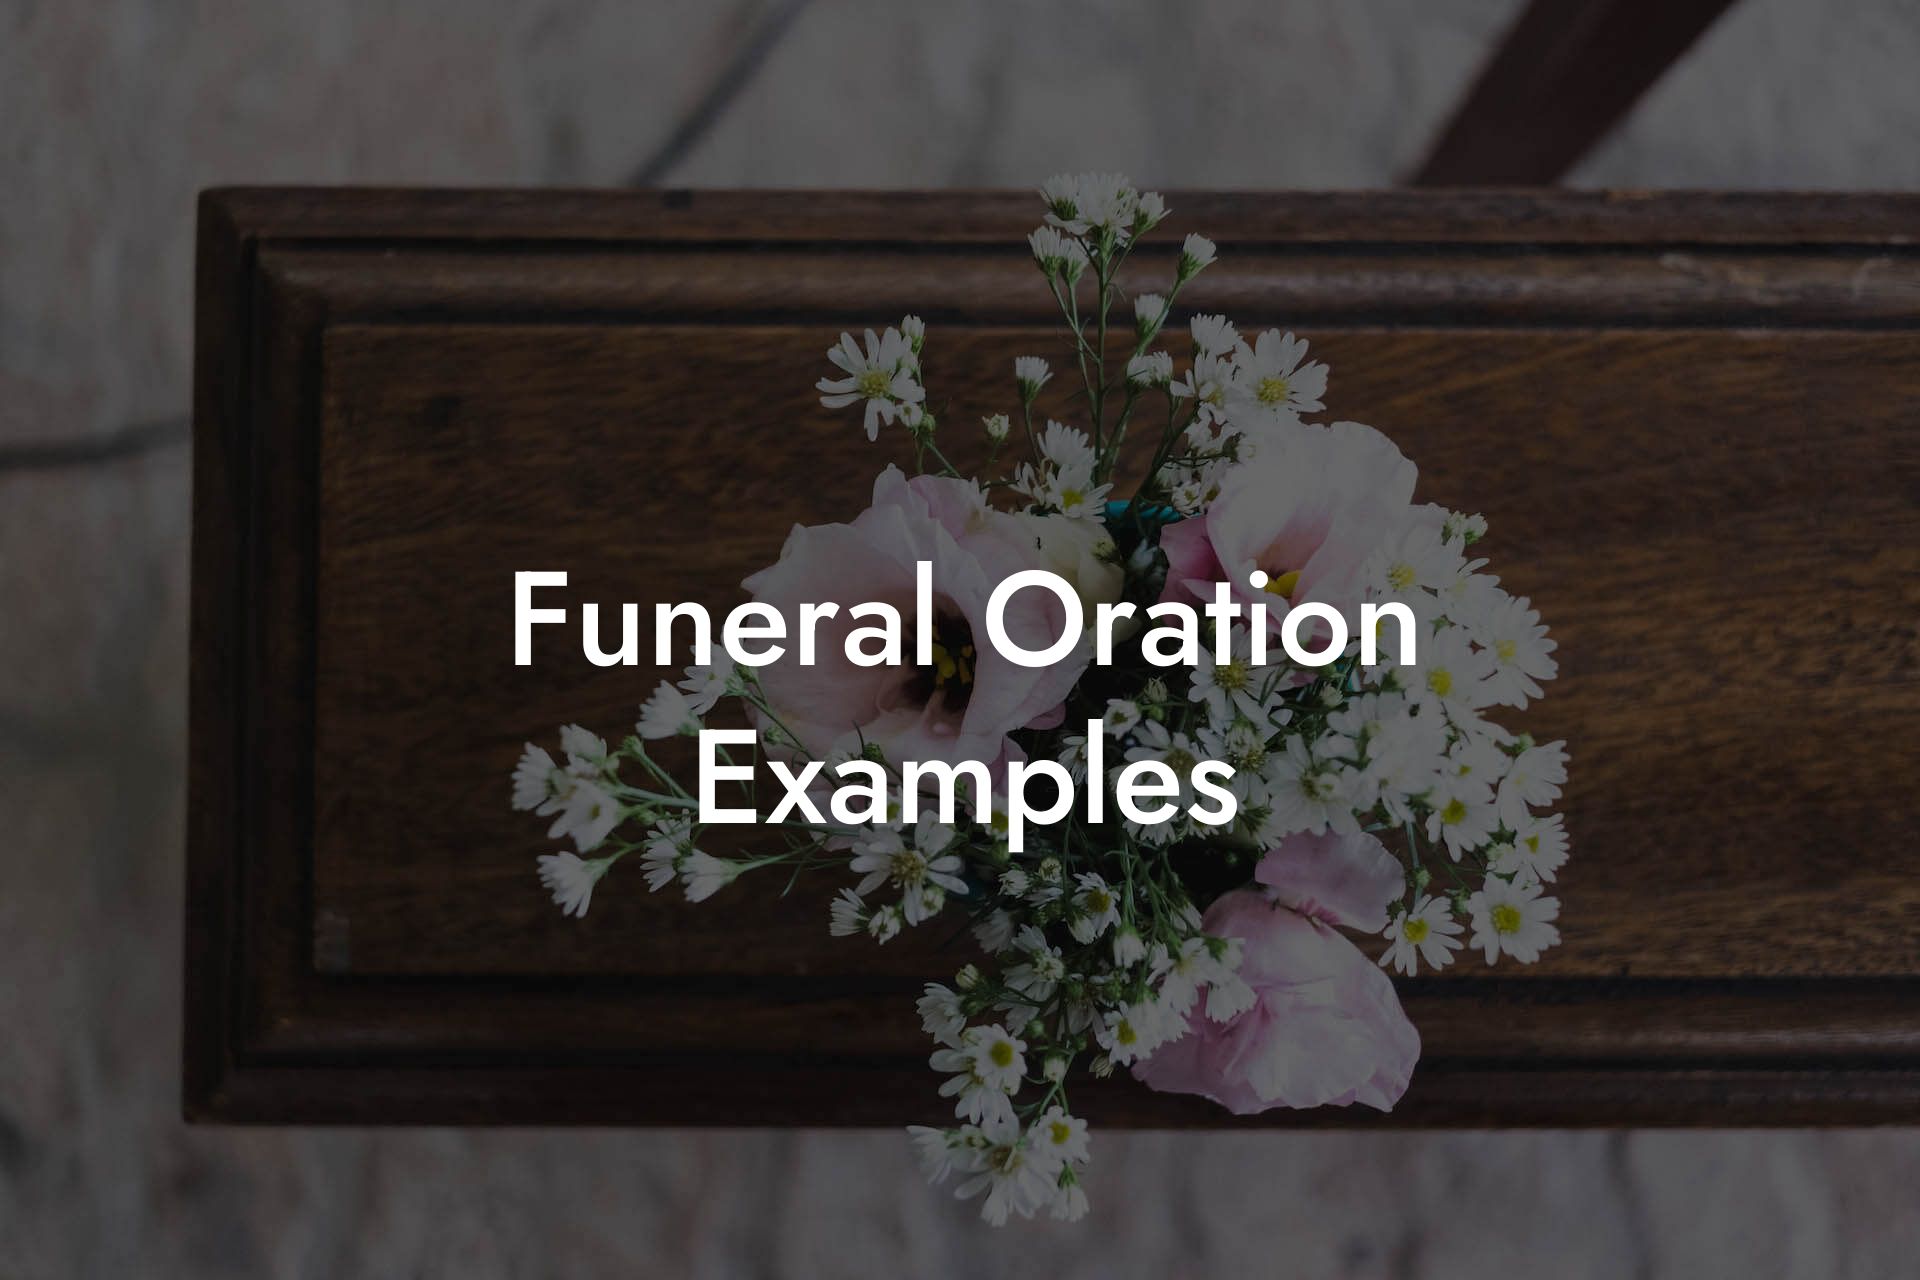 Funeral Oration Examples